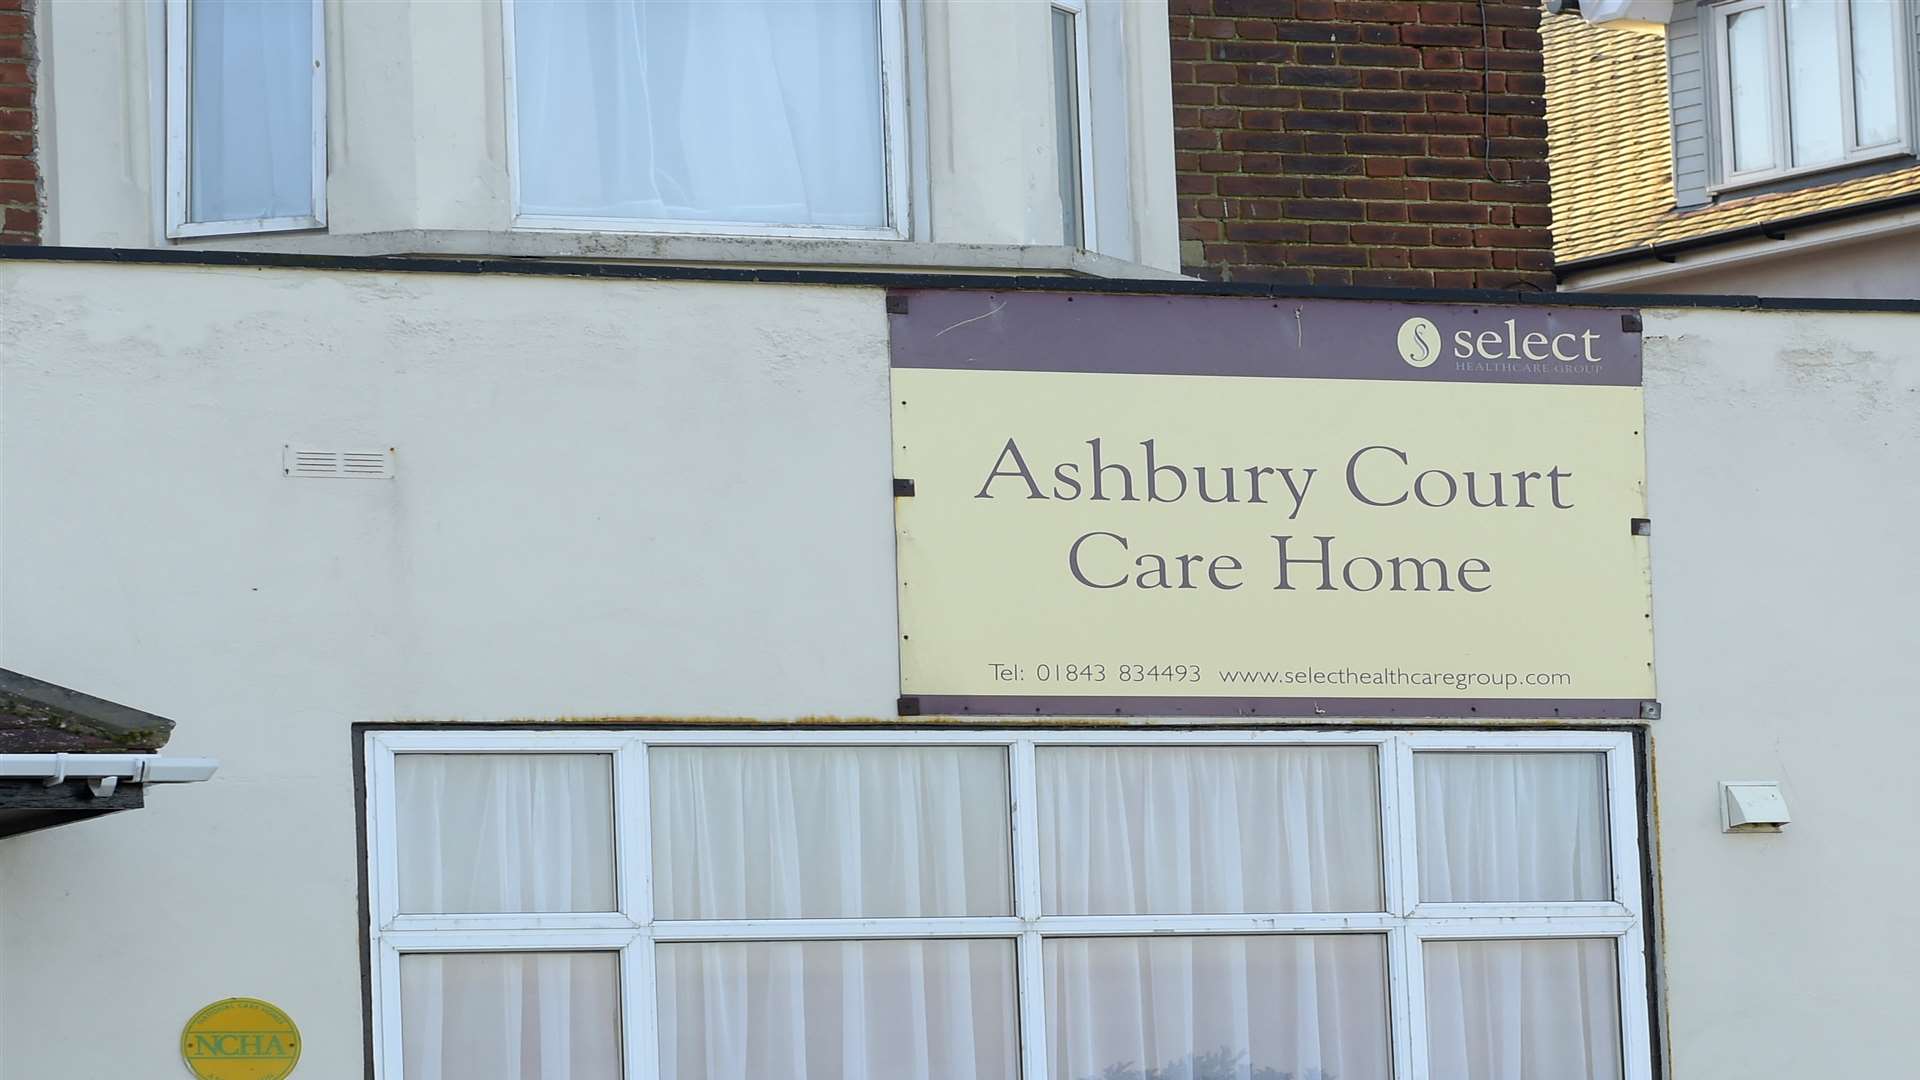 Ashbury Court was visited by inspectors late last year